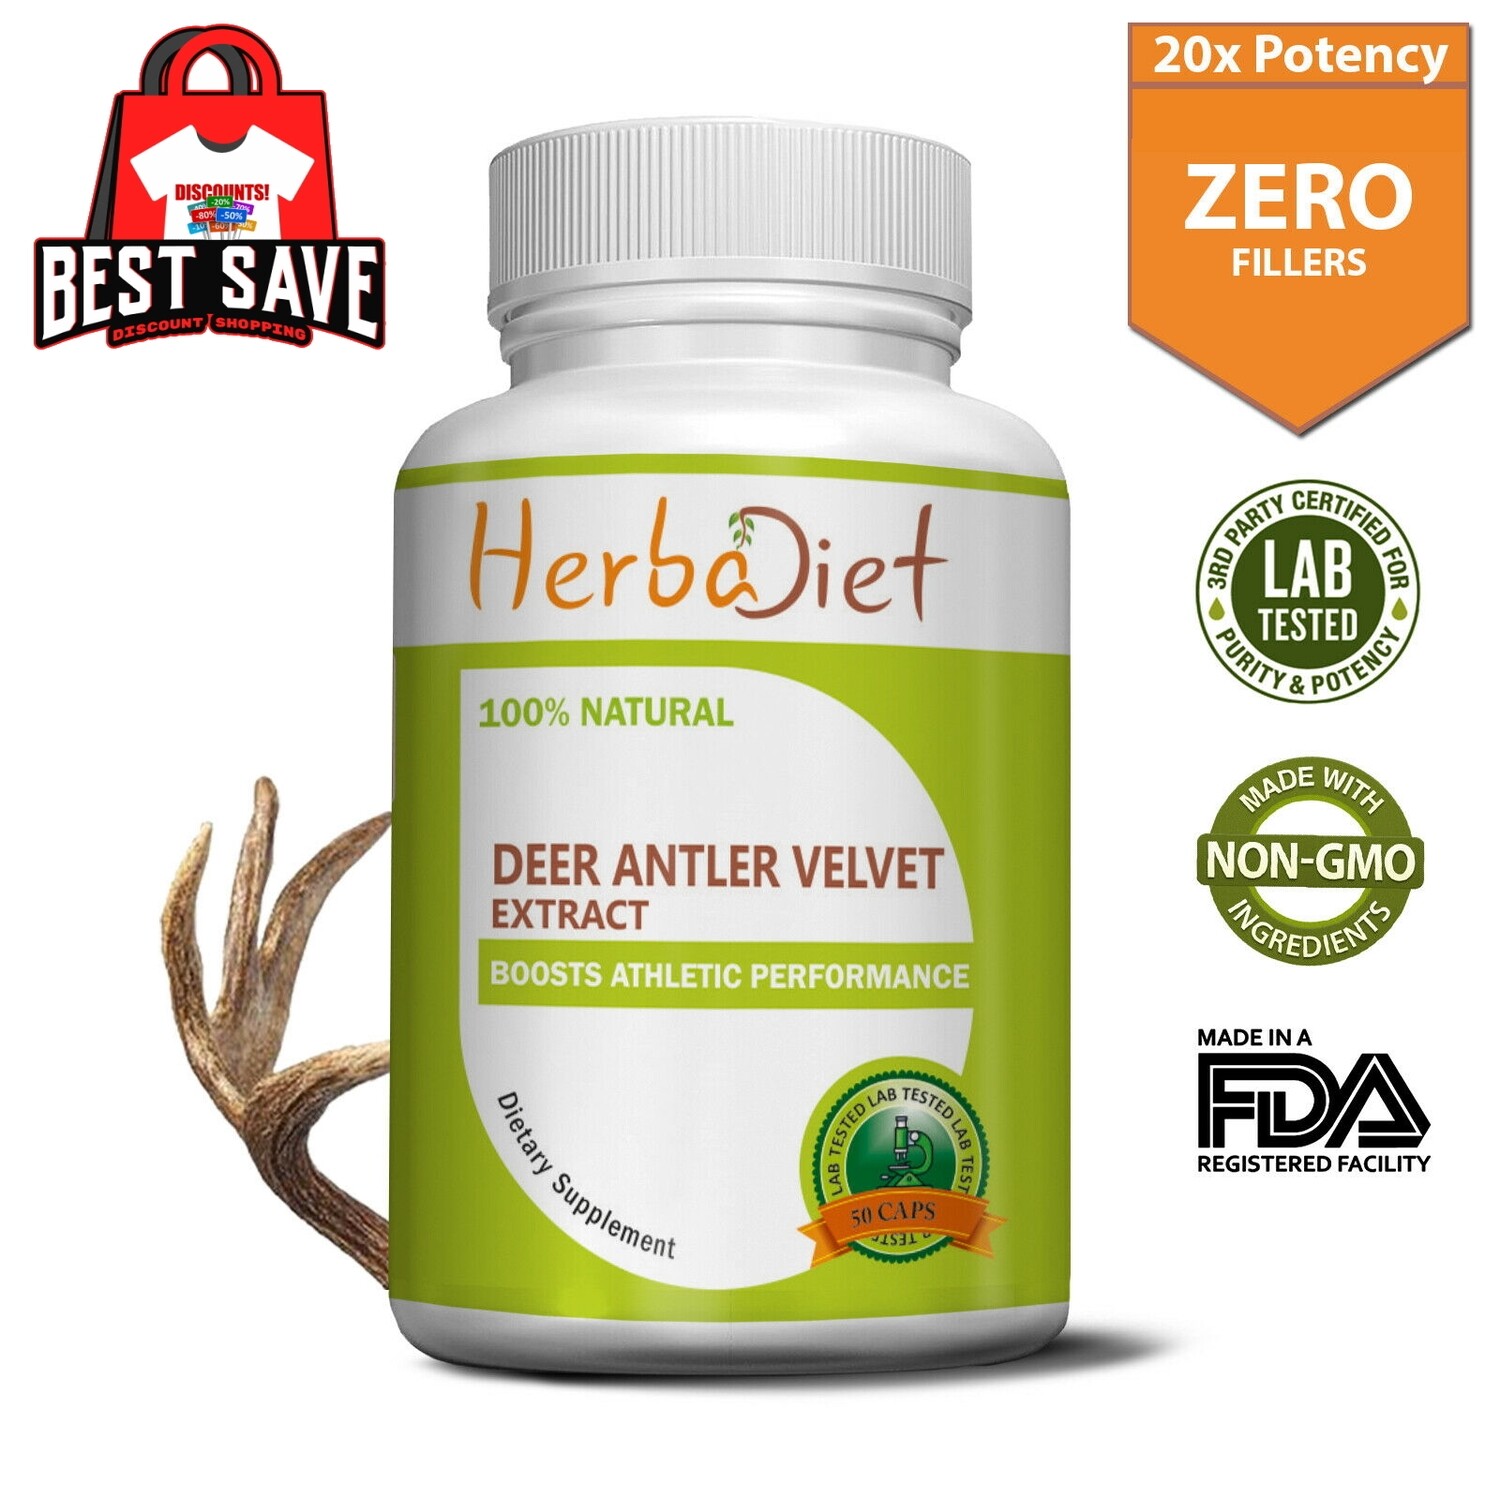 Deer Antler Velvet 20-1 Extract Capsules Supports Athletic Performance Strength 60 x 250mg Capsules